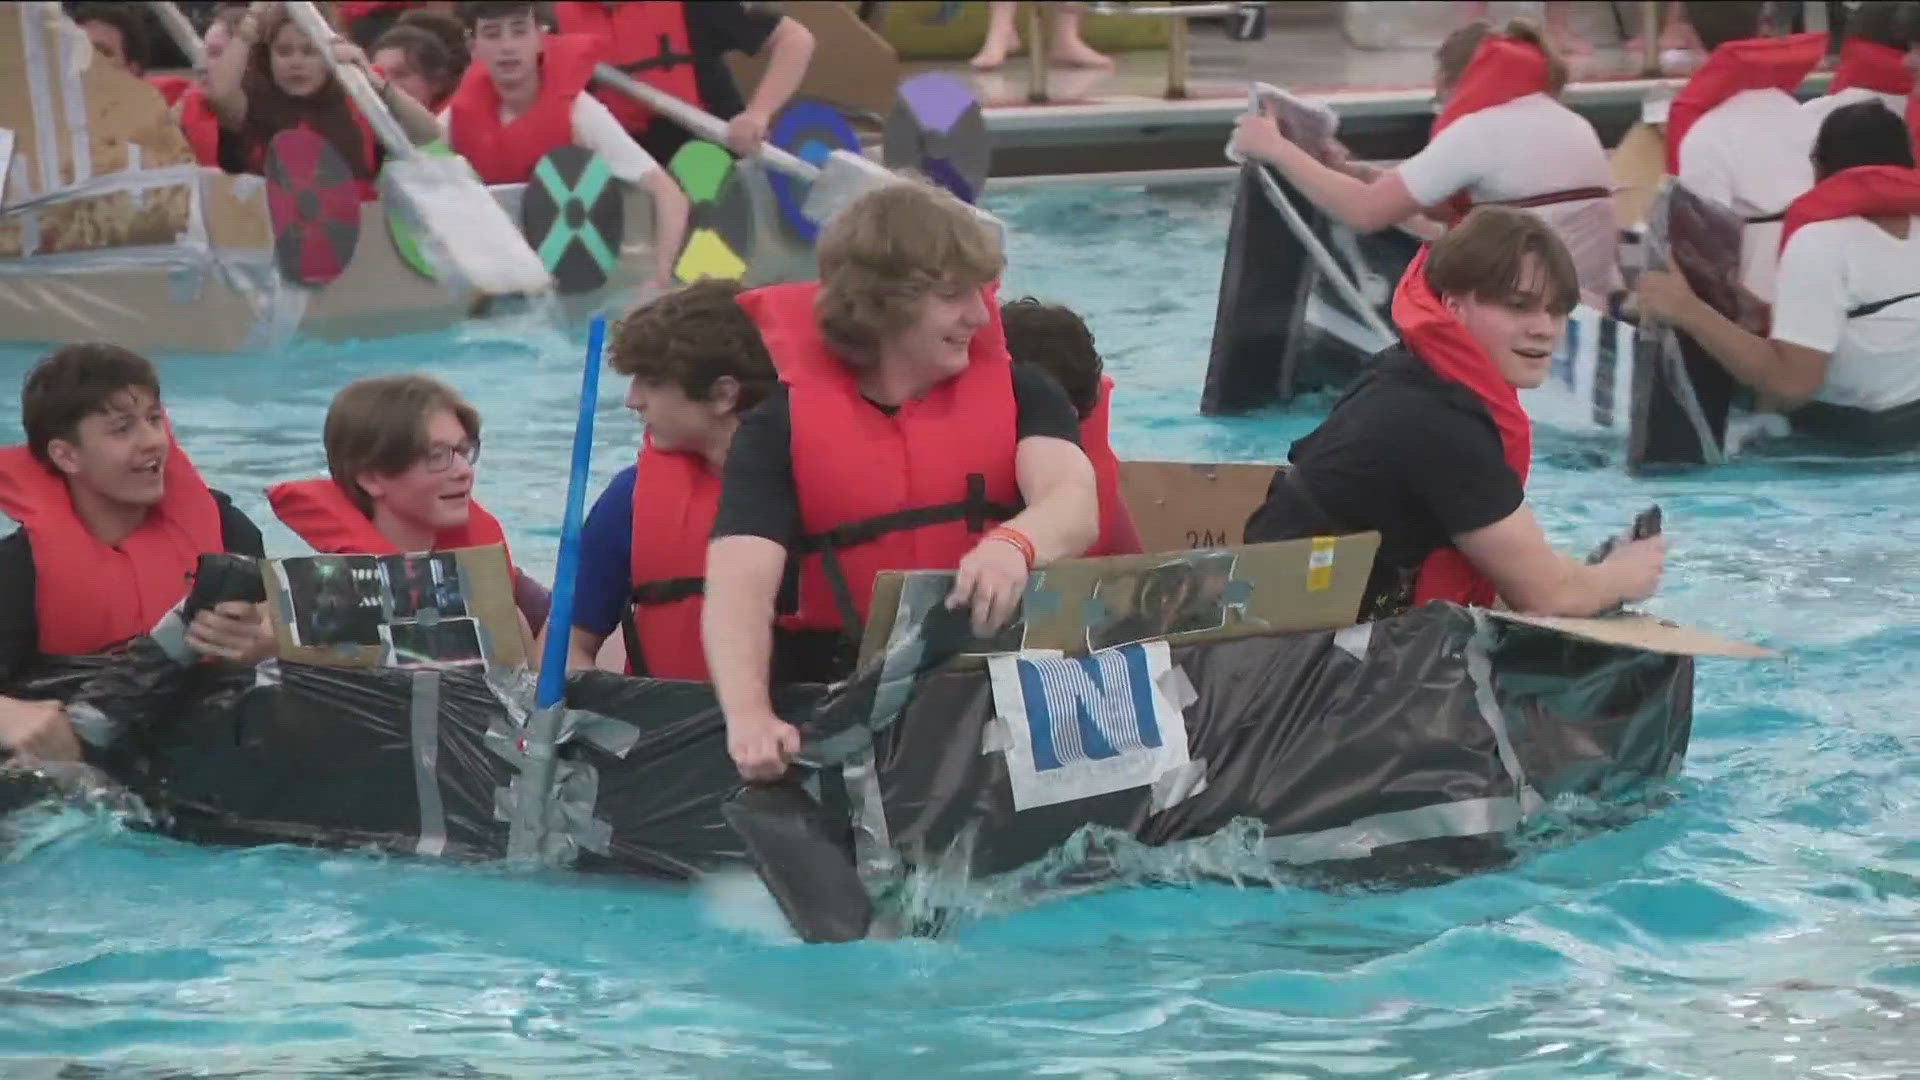 It was all hands on deck for students at the Clarence Central School District.
Engineering students spent class time at the pool for a cardboard boat races!